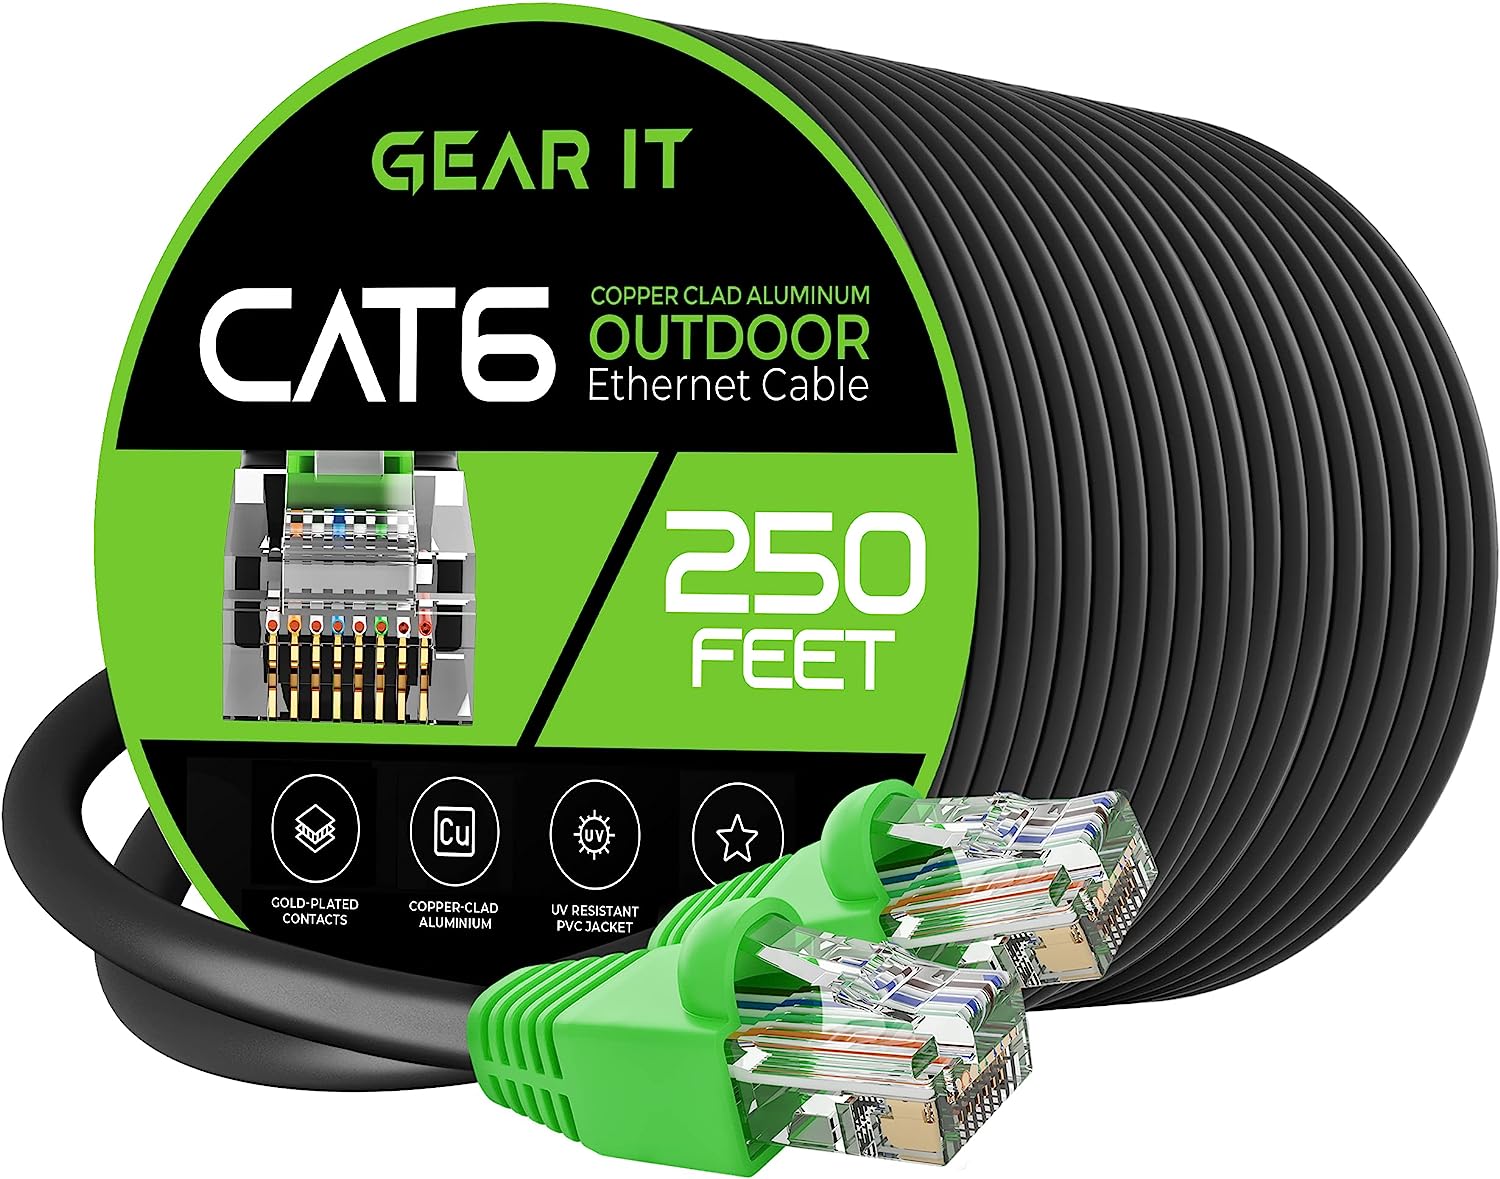 GearIT Cat6 Outdoor Ethernet Cable (250 Feet) CCA [...]